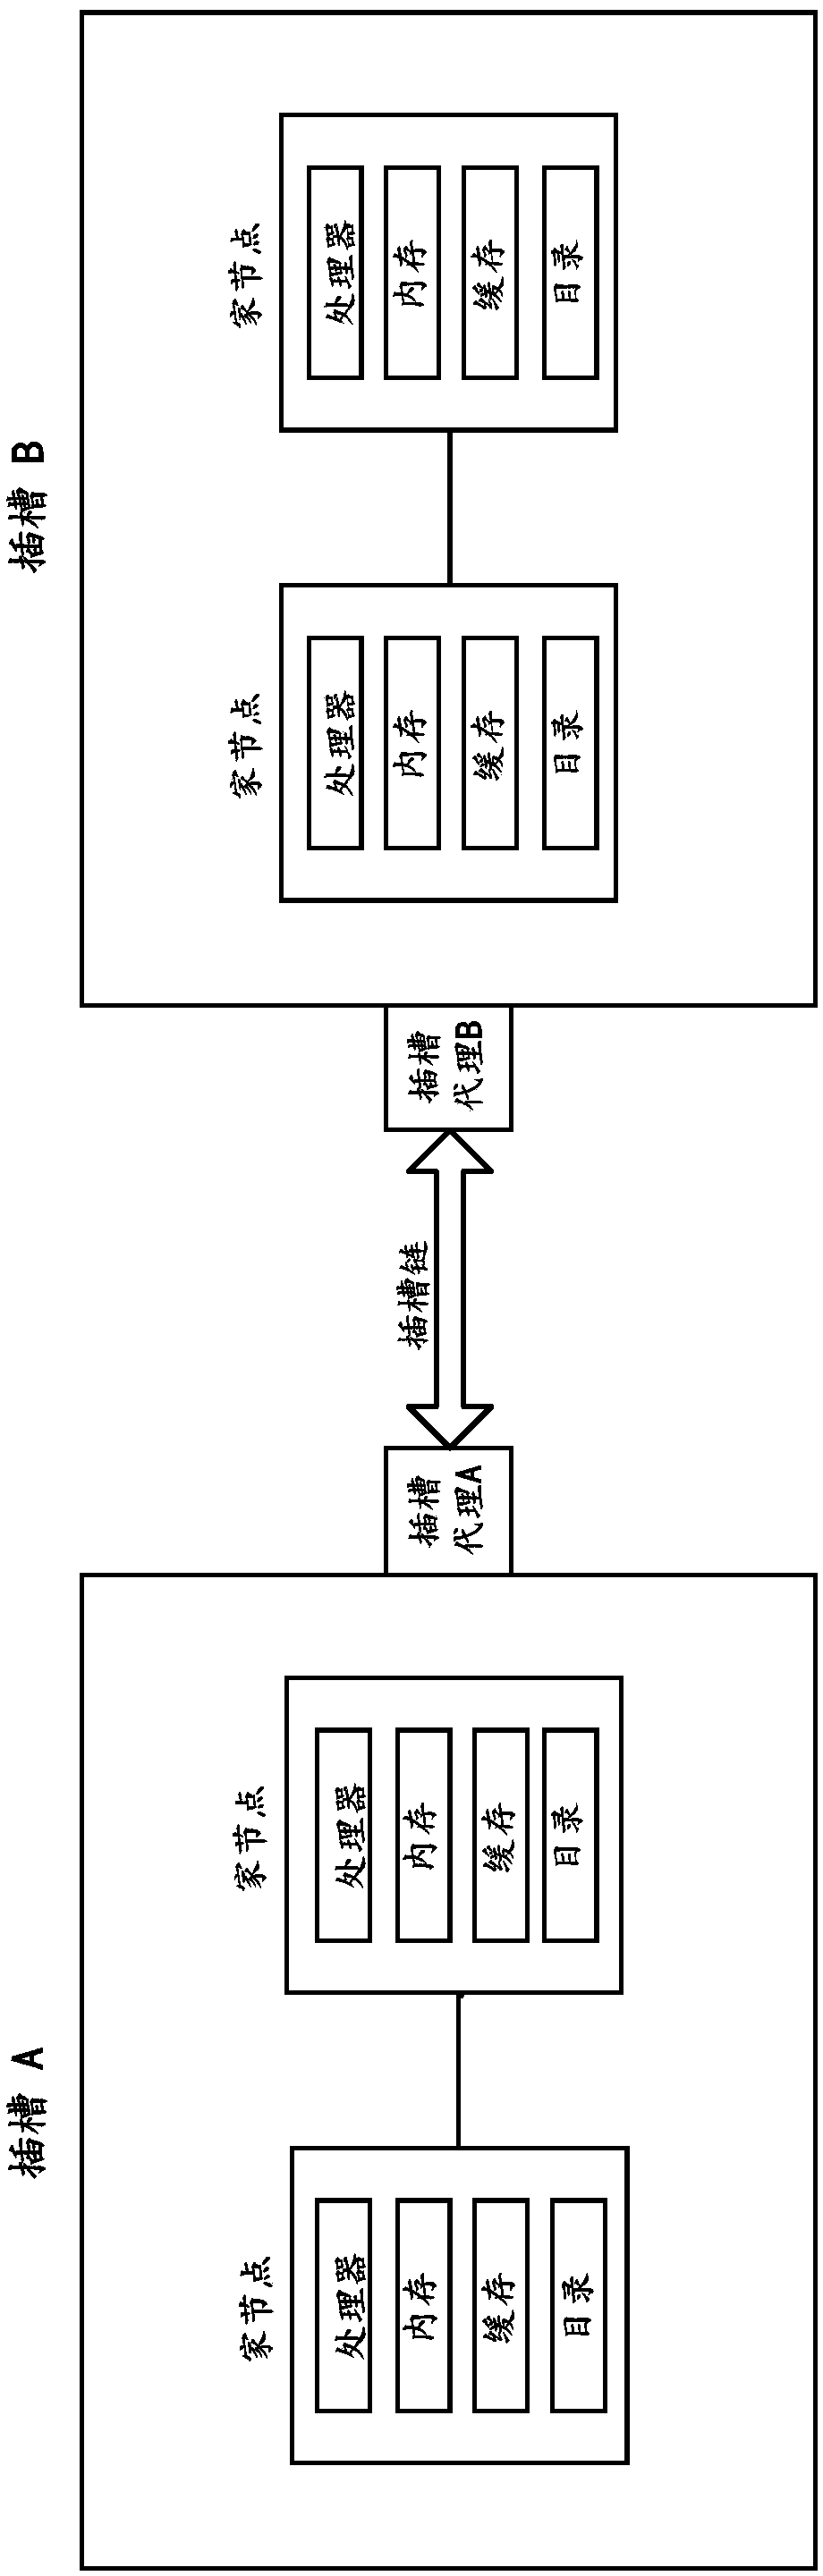 Method and apparatus for data migration or exchange between slots and multiprocessor system